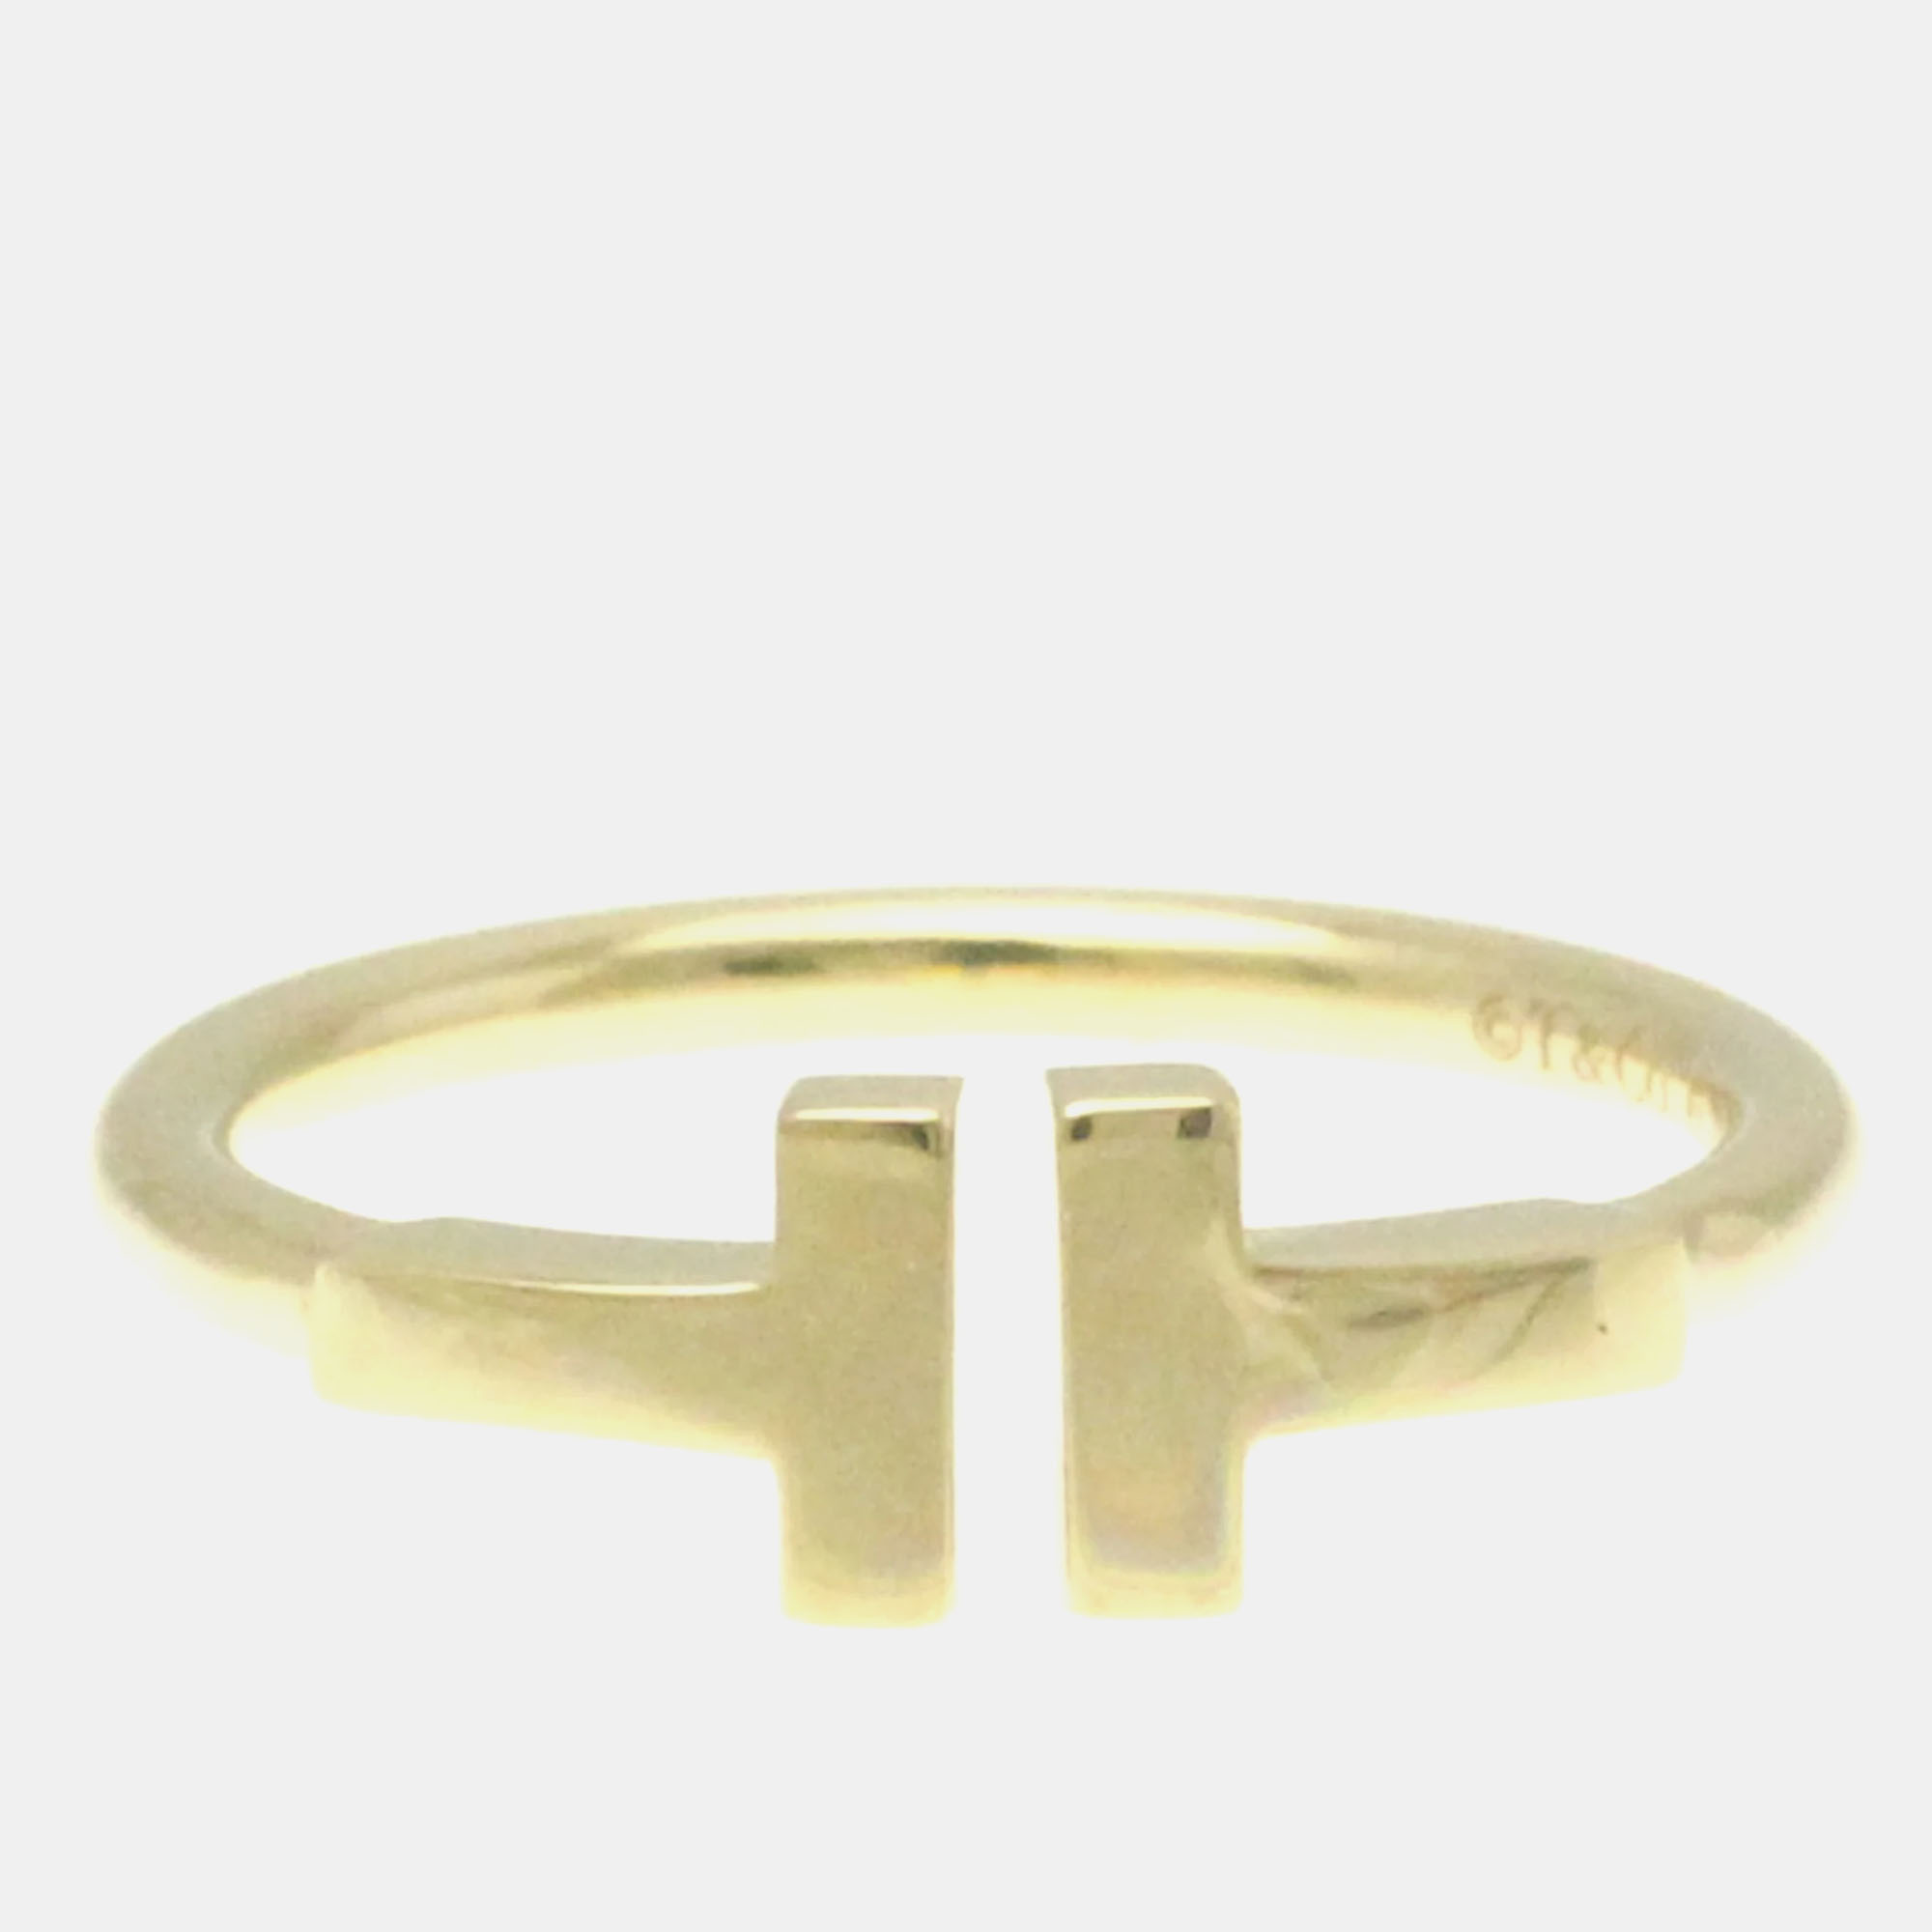 Tiffany & co. 18k yellow gold t wire ring eu 50.5